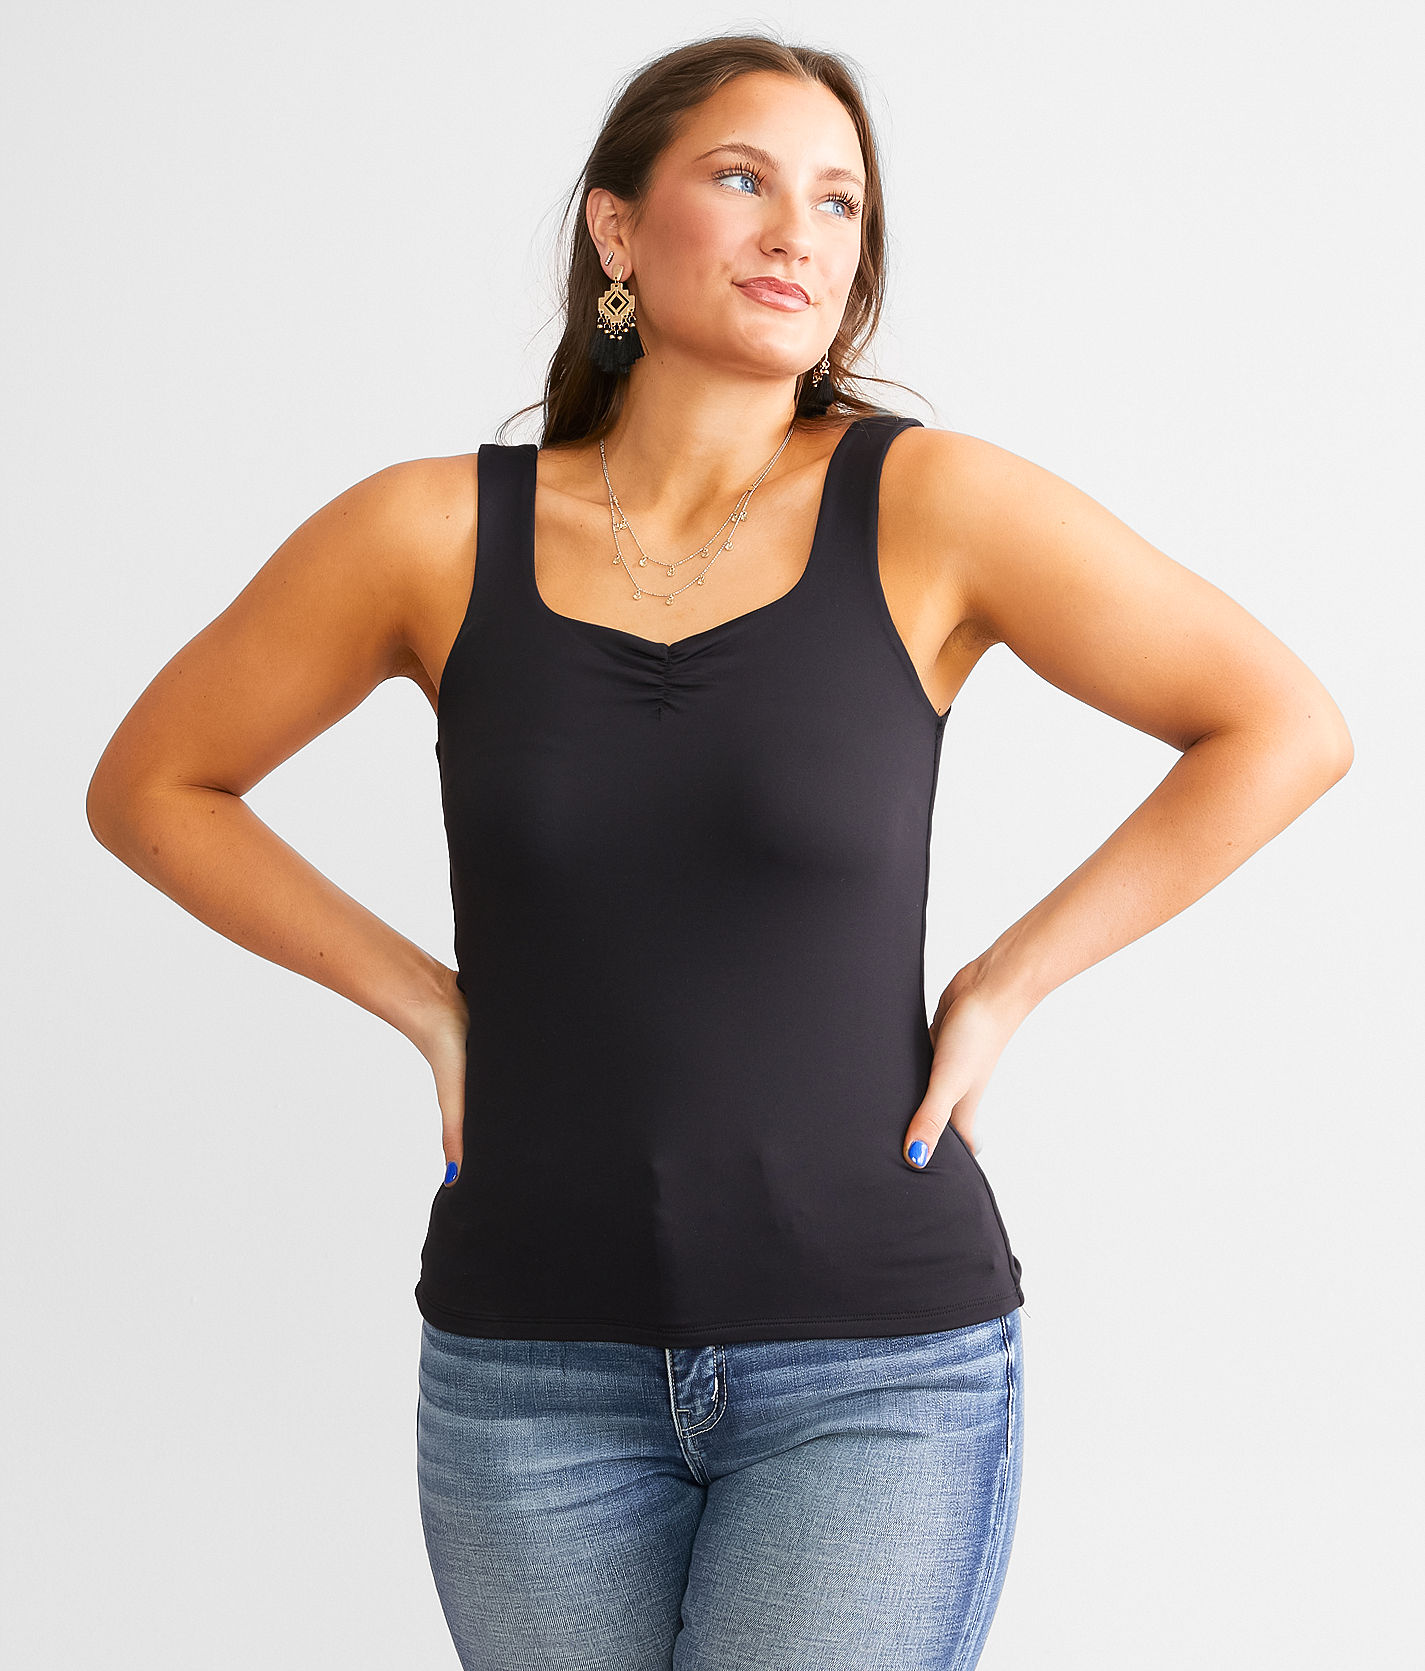 Buckle Black Shaping & Smoothing Tank Top - Women's Tank Tops in White